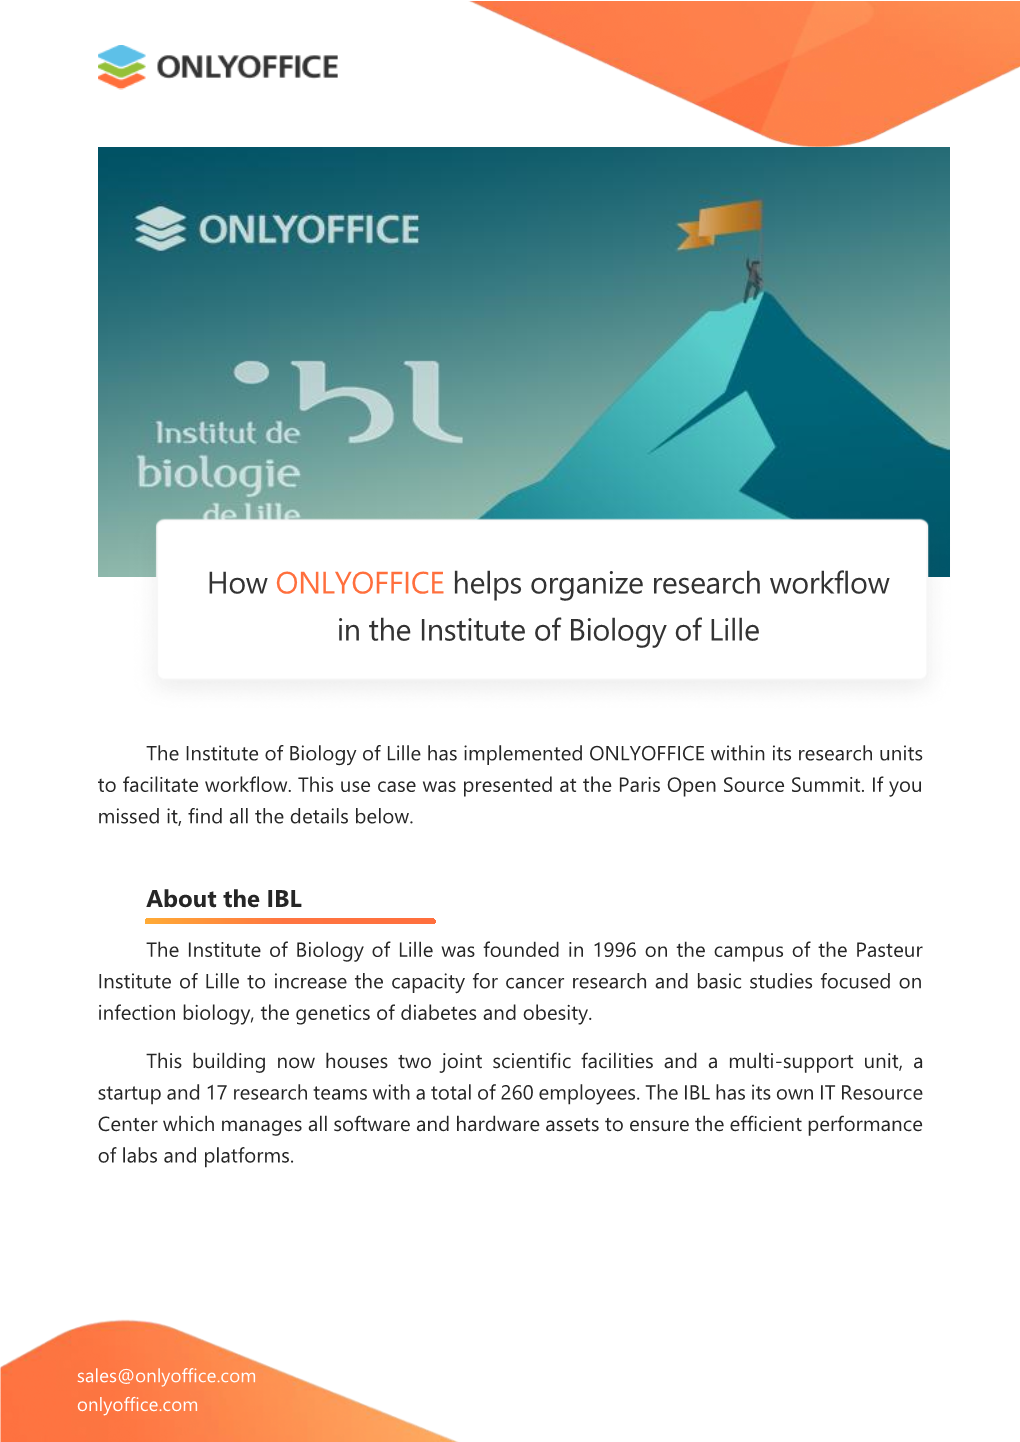 How ONLYOFFICE Helps Organize Research Workflow in the Institute Of